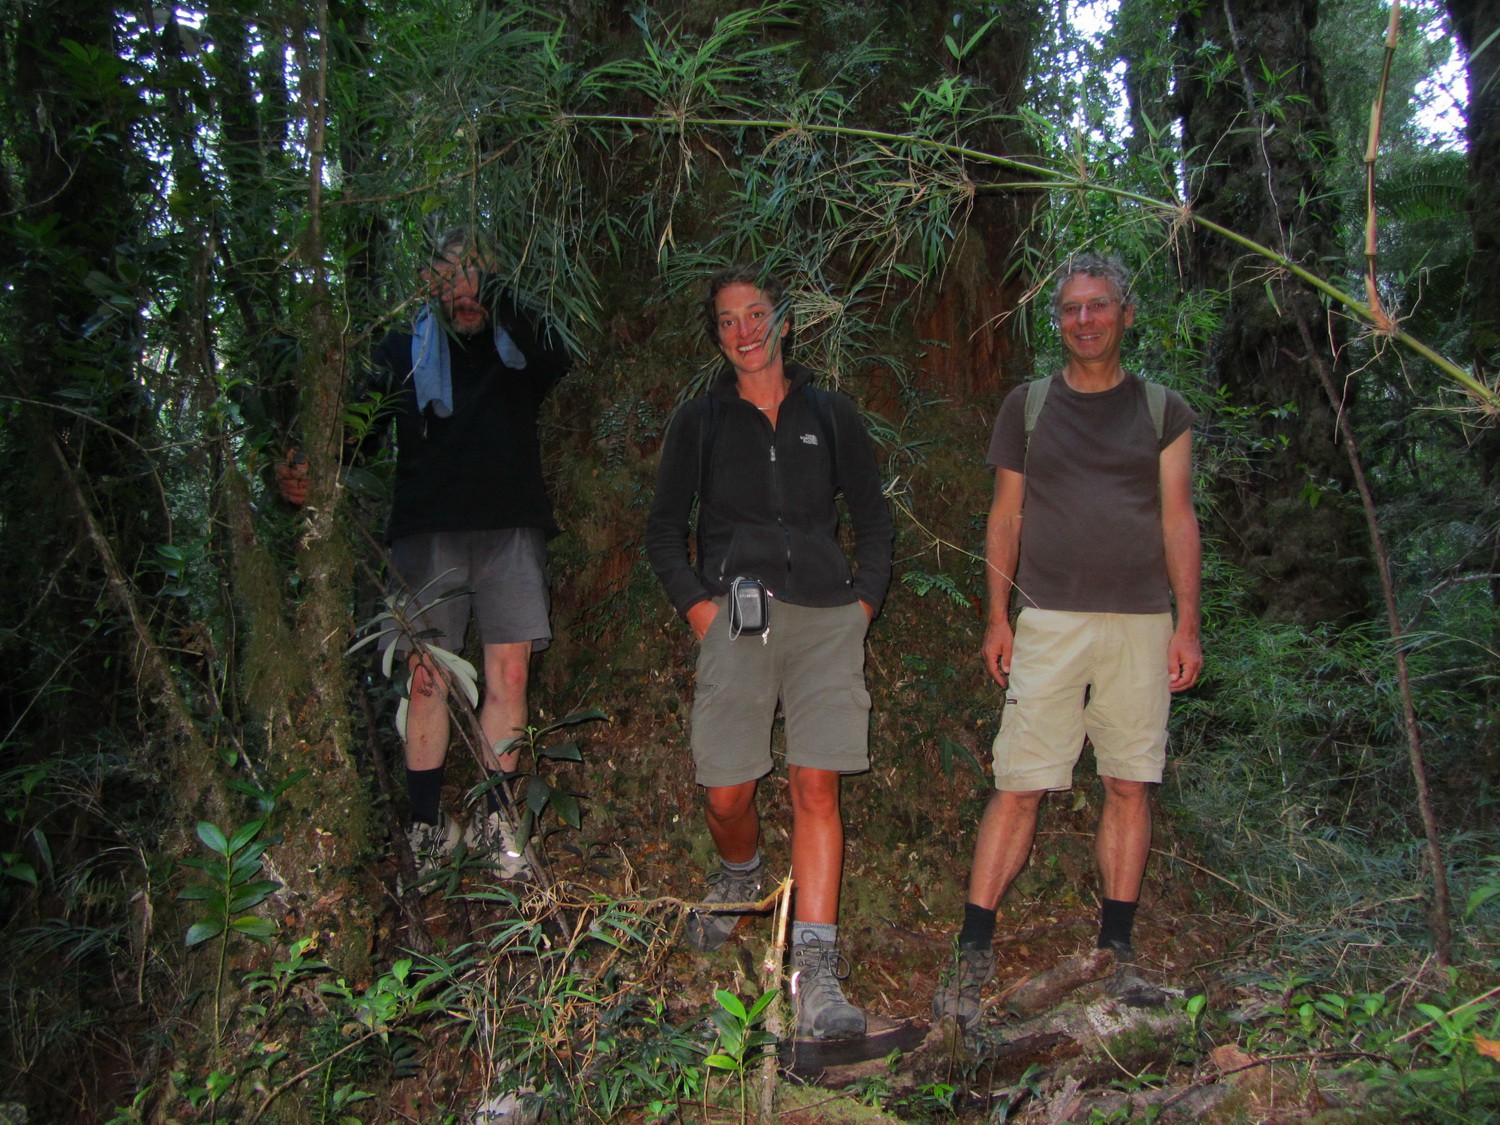 Tommy, Laura and Alfred in front of a huge trunk of an Alerce tree